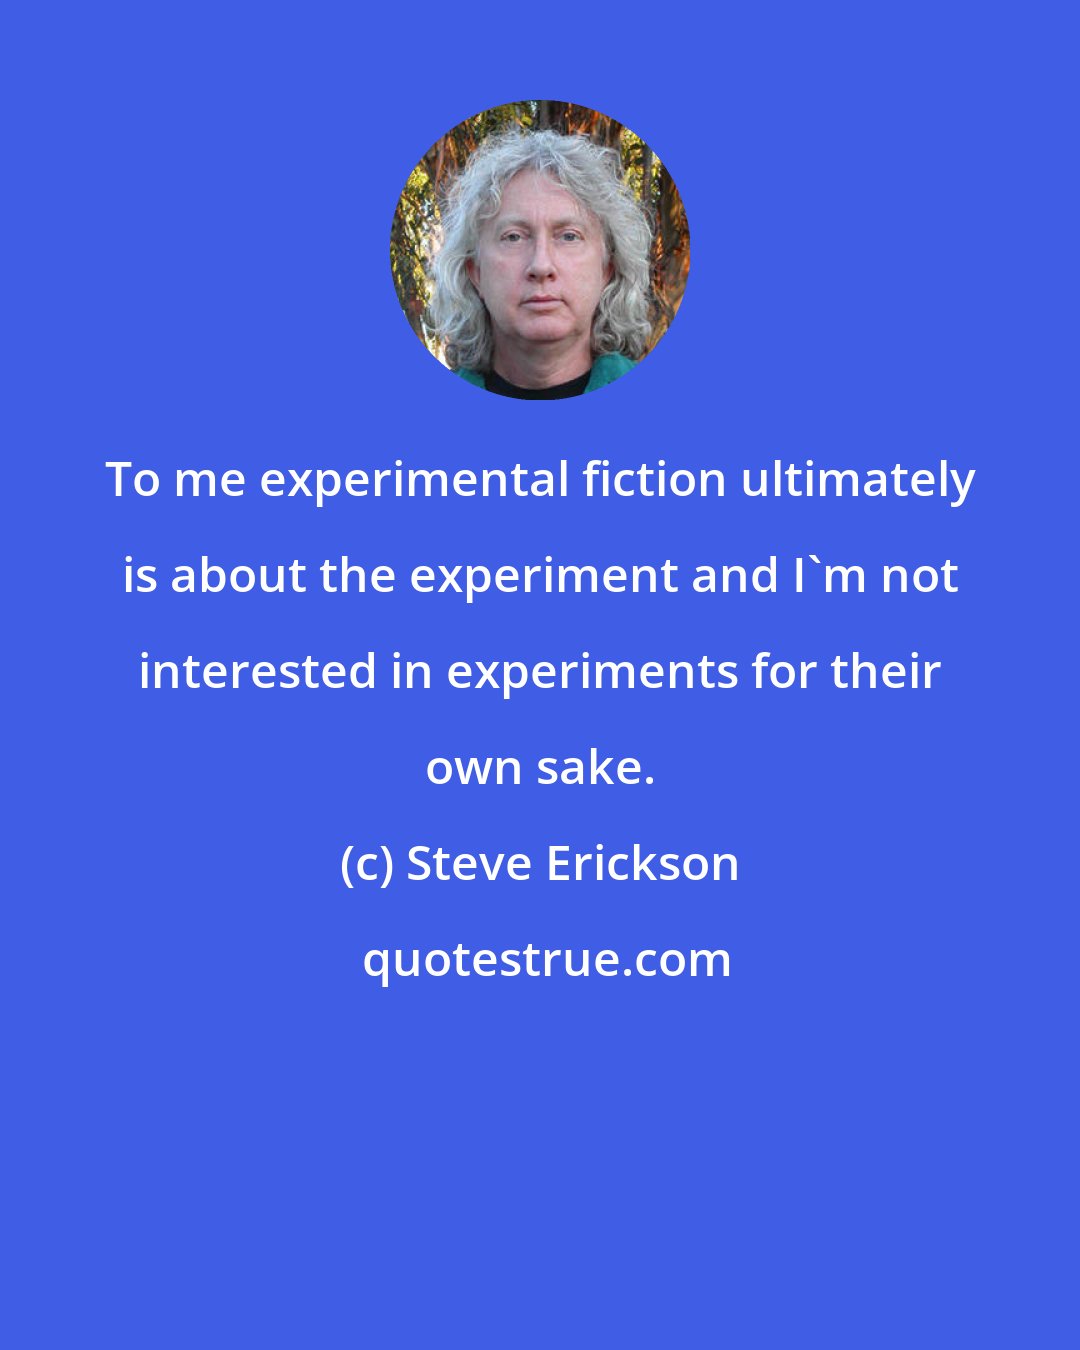 Steve Erickson: To me experimental fiction ultimately is about the experiment and I'm not interested in experiments for their own sake.